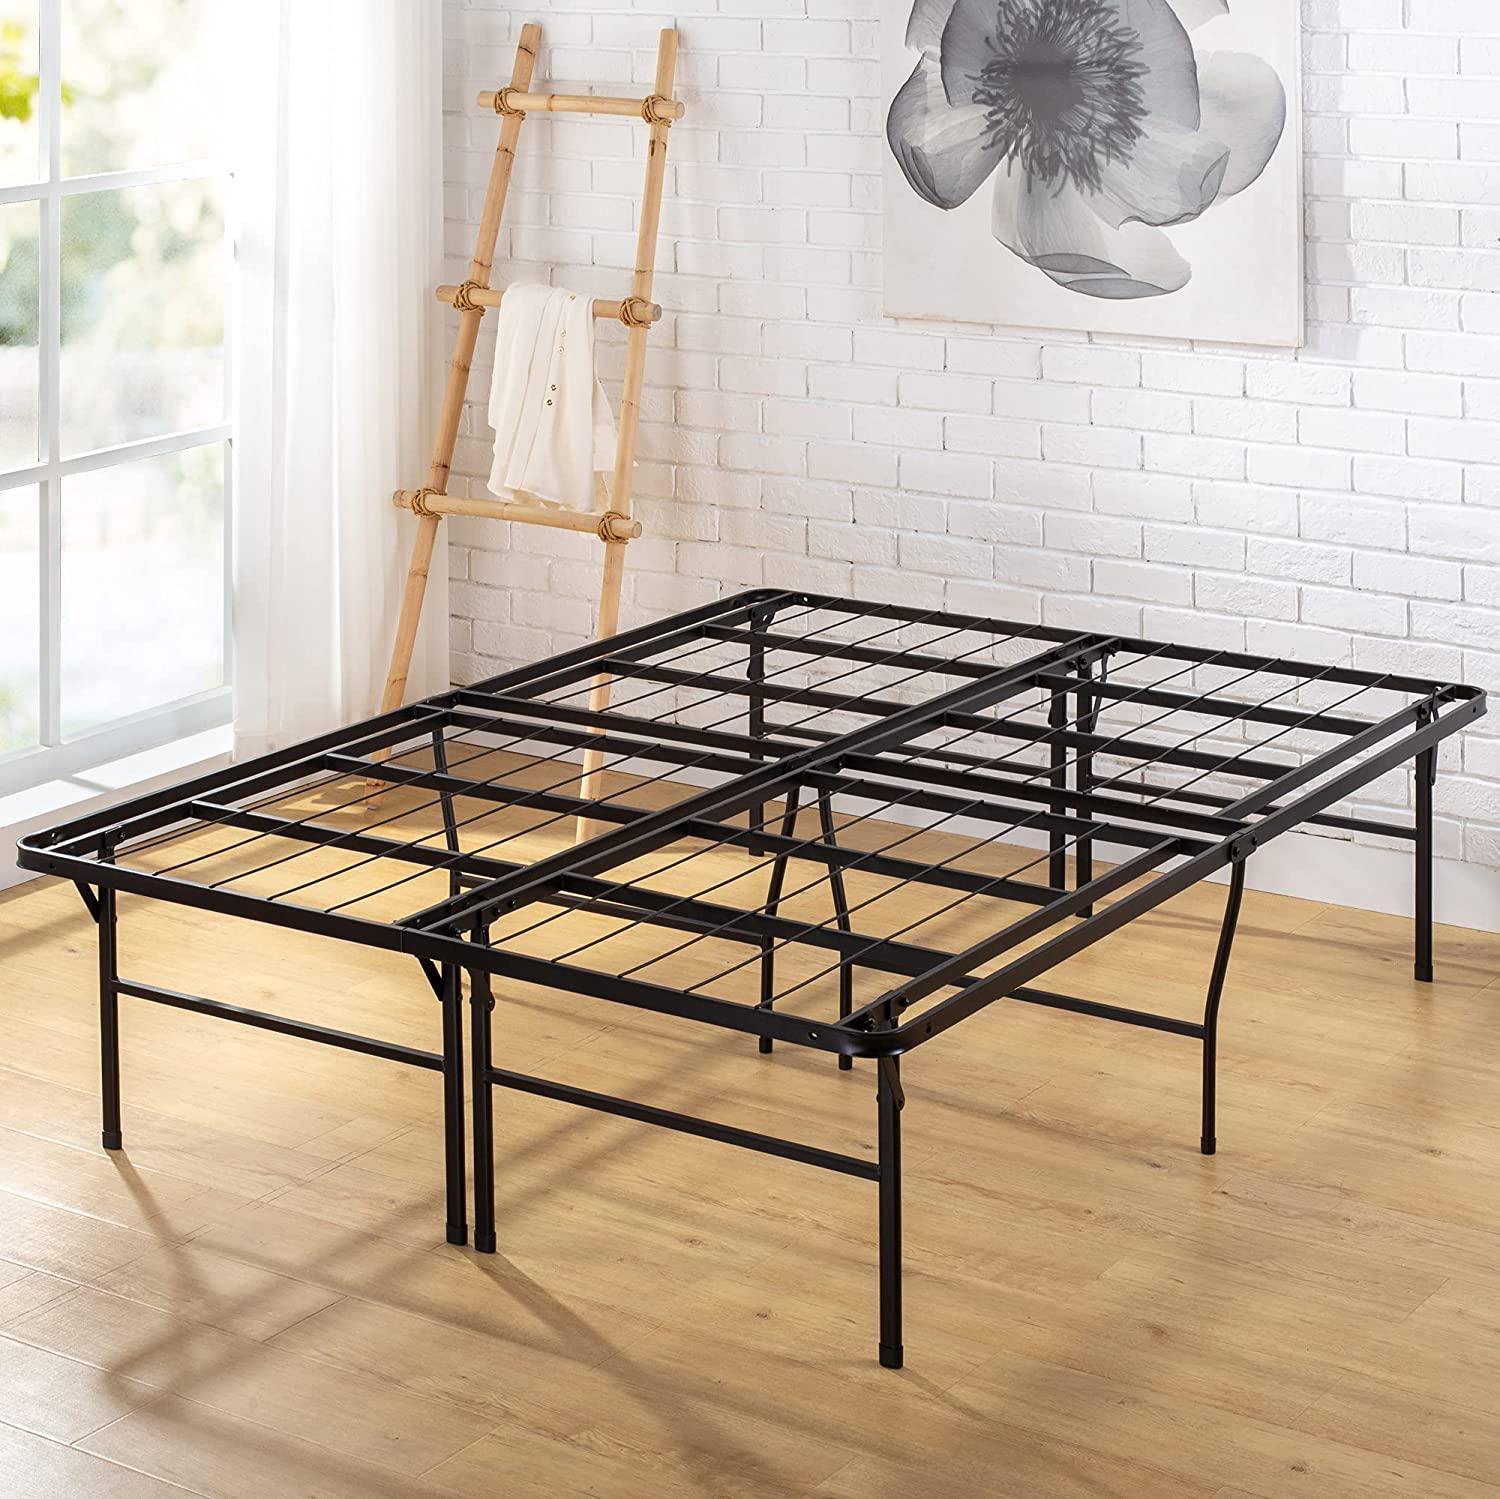 Zinus SmartBase Heavy Duty Mattress Foundation Bed Frame for $82.99 Shipped